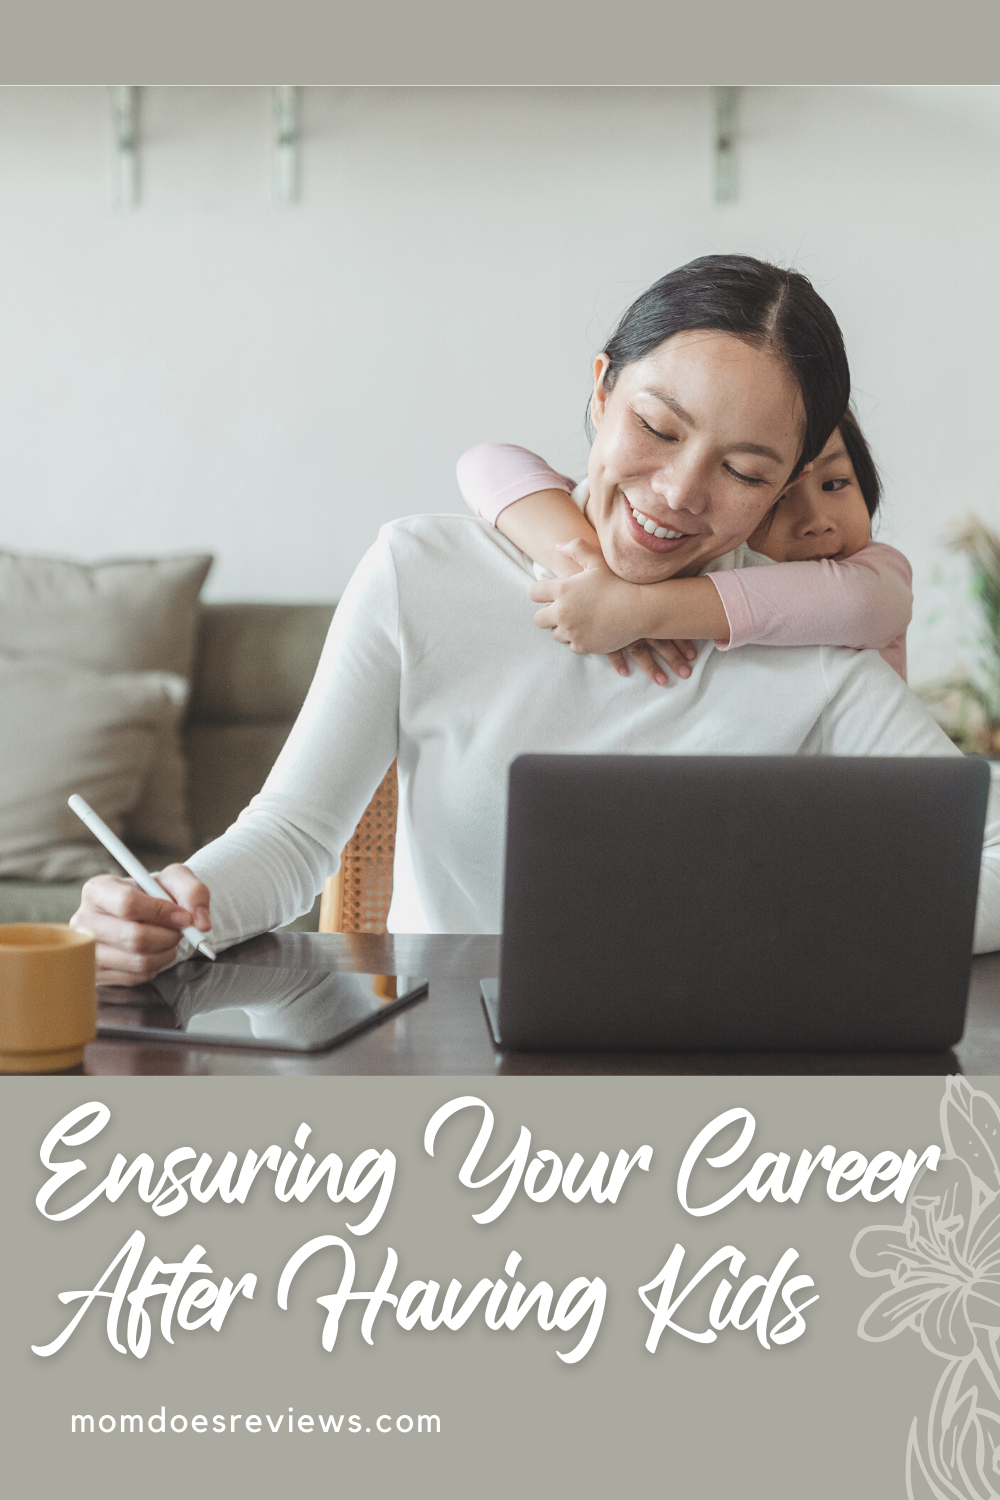 Ensuring Your Career After Having Kids Is the Right Choice